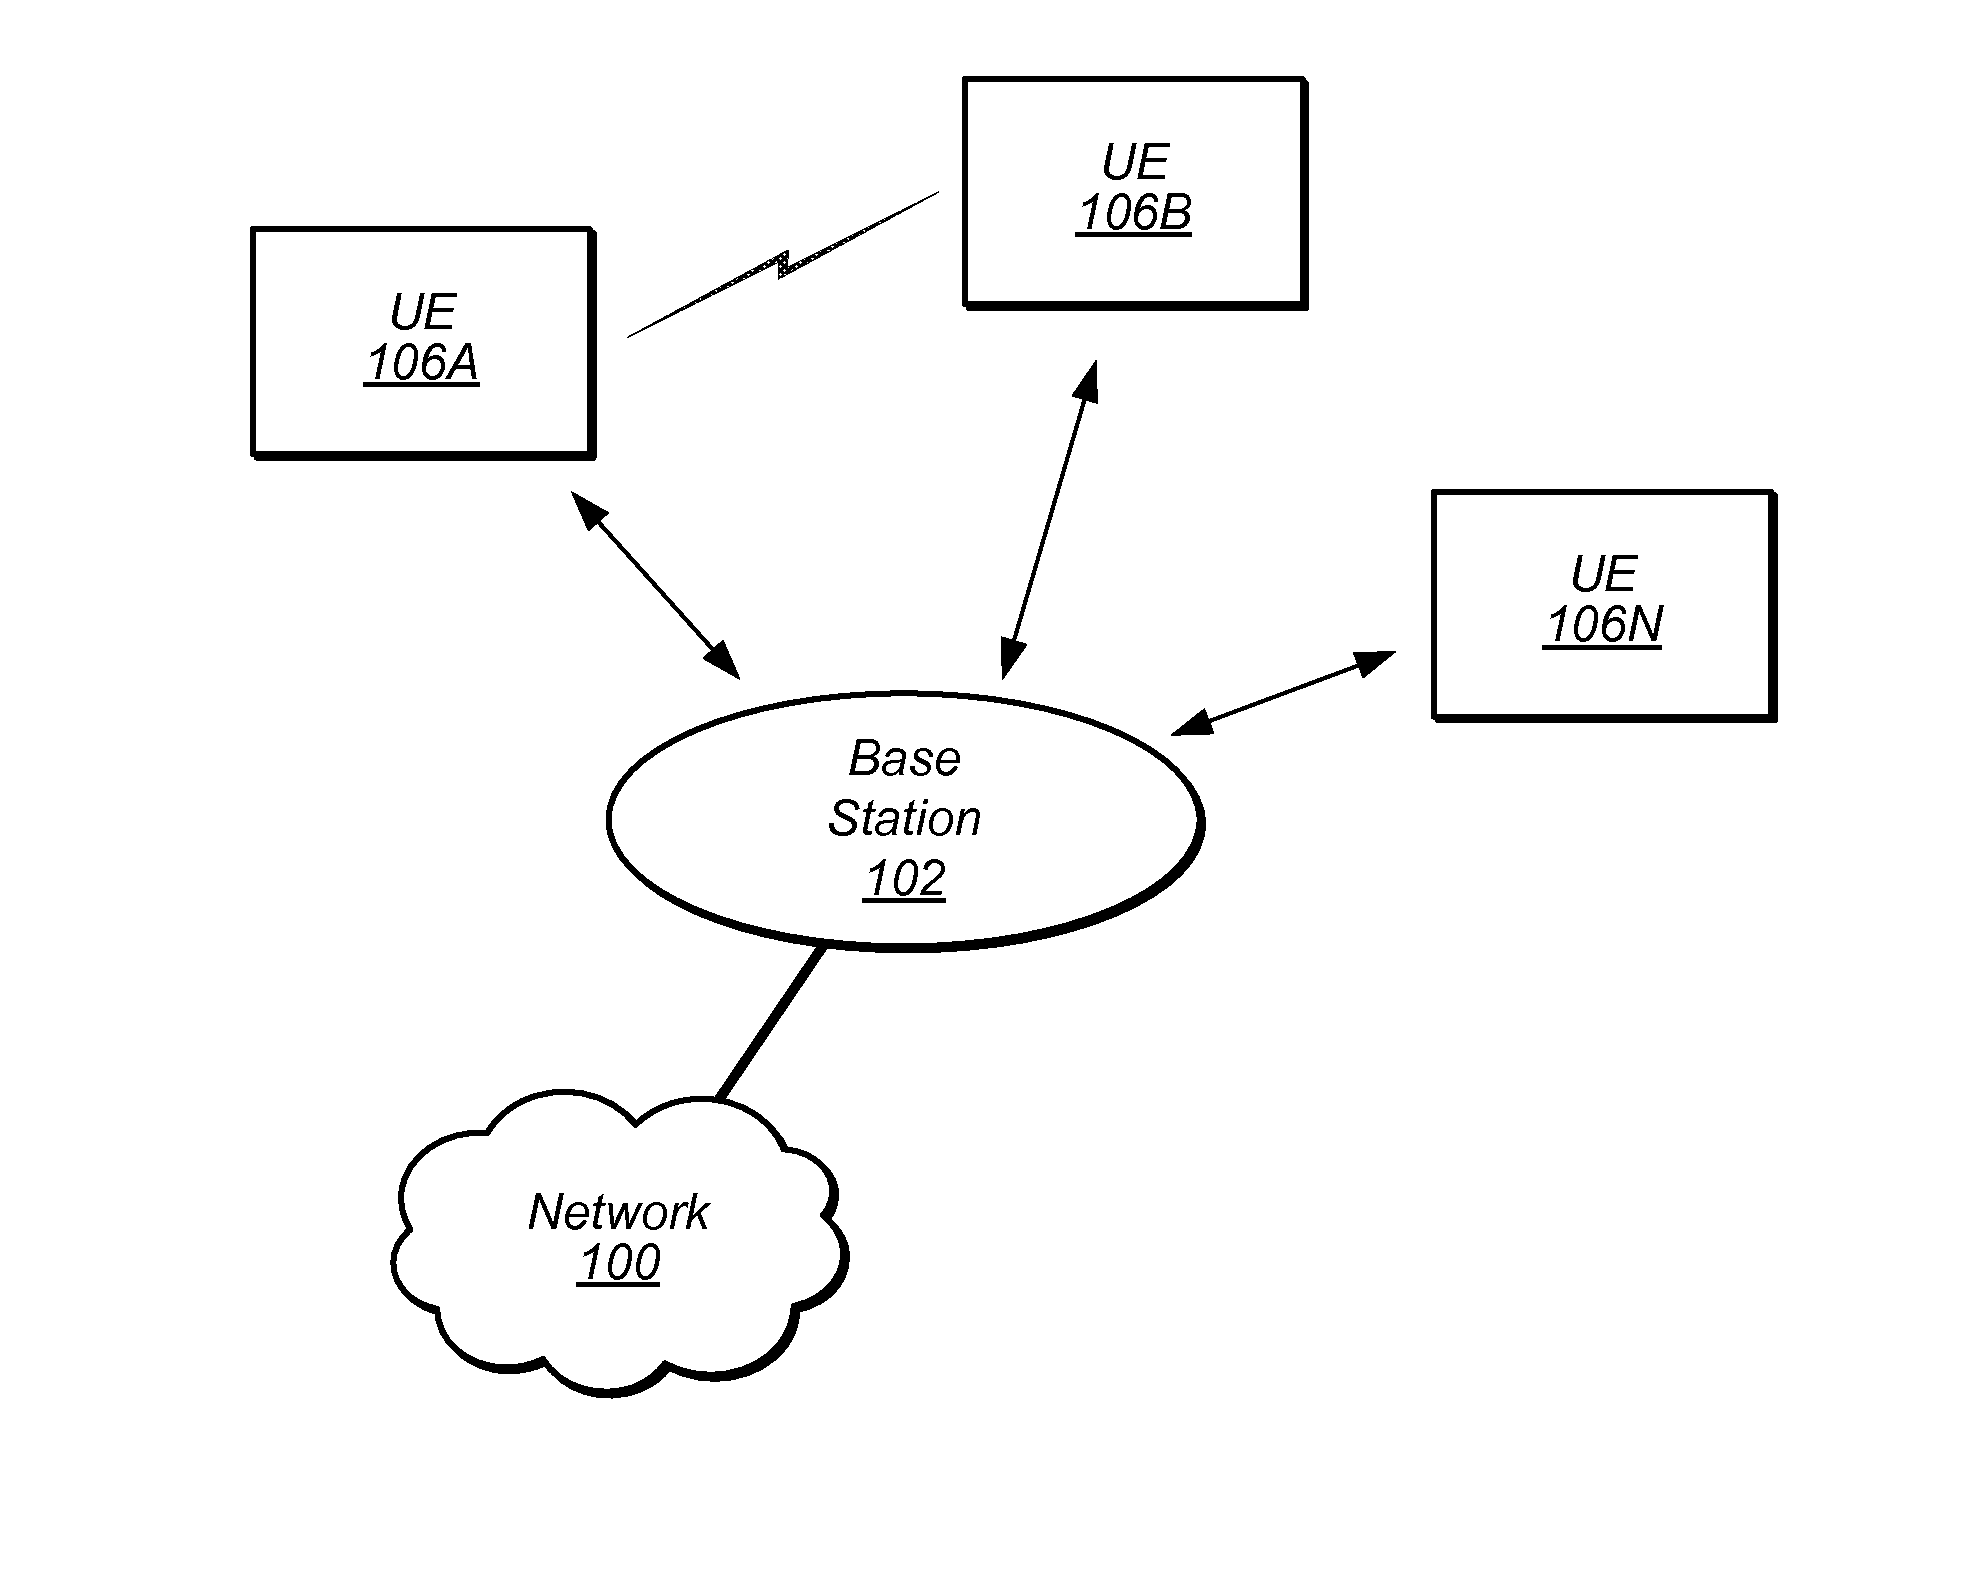 Distributed Computing in a Wireless Communication System